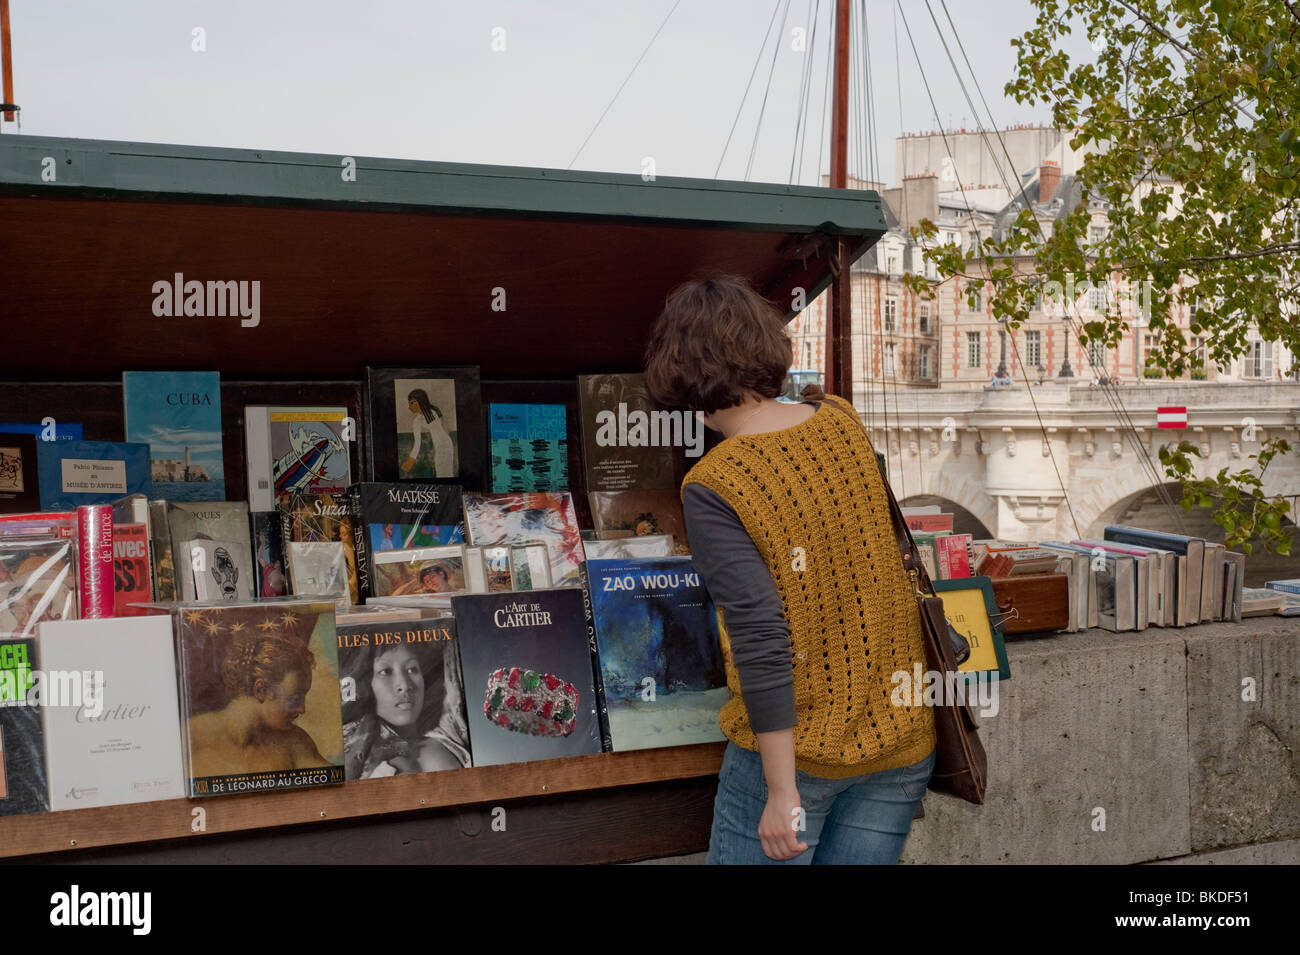 Woman Shopping, Old Books on Sale Outside Sidewalk Market, Paris, France, Seine River Quay, Bouquinistes, Antique Book Sellers Stock Photo